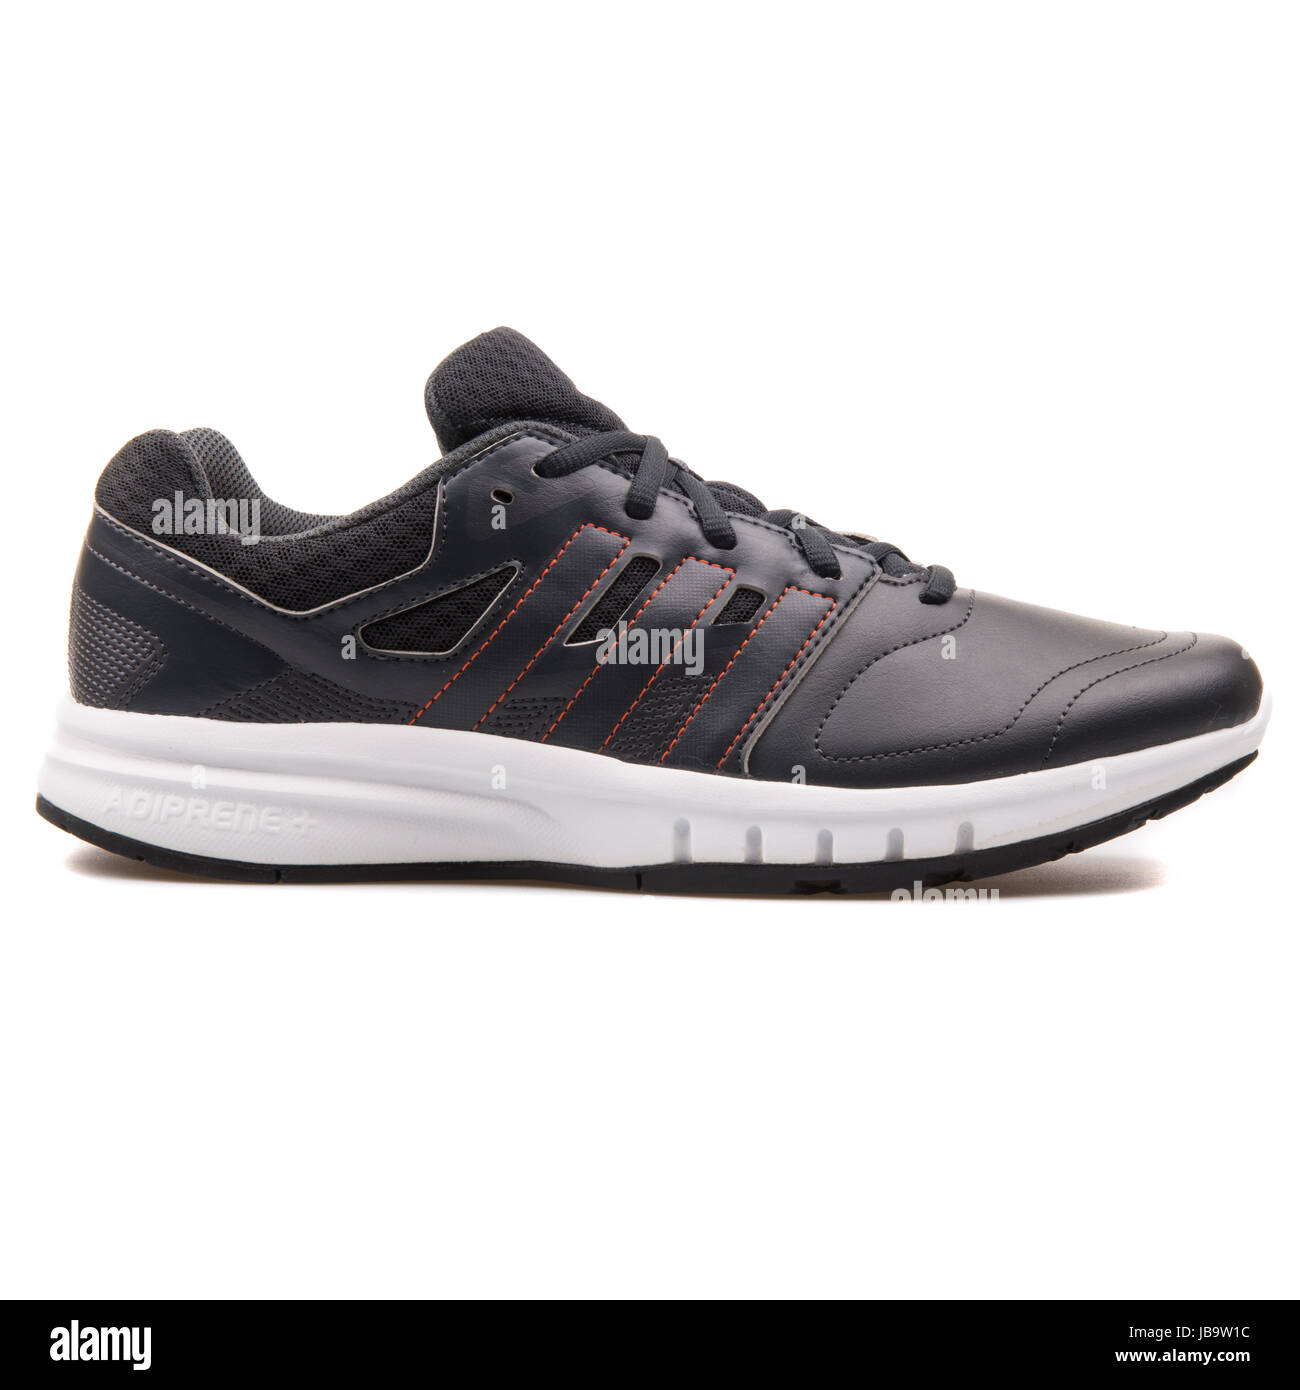 Adidas Galaxy Trainer Black Men's Running Shoes - AF6022 Stock Photo - Alamy